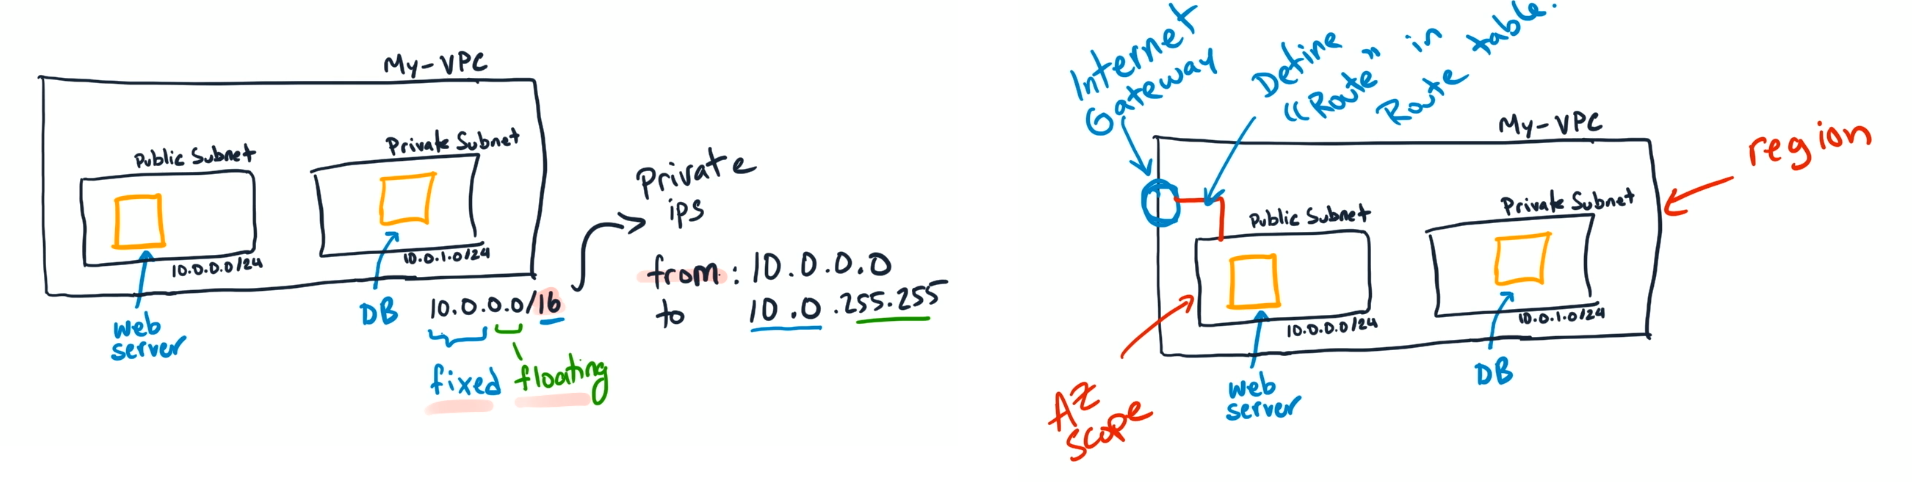 Legacy VPC subnets & gateways and routes